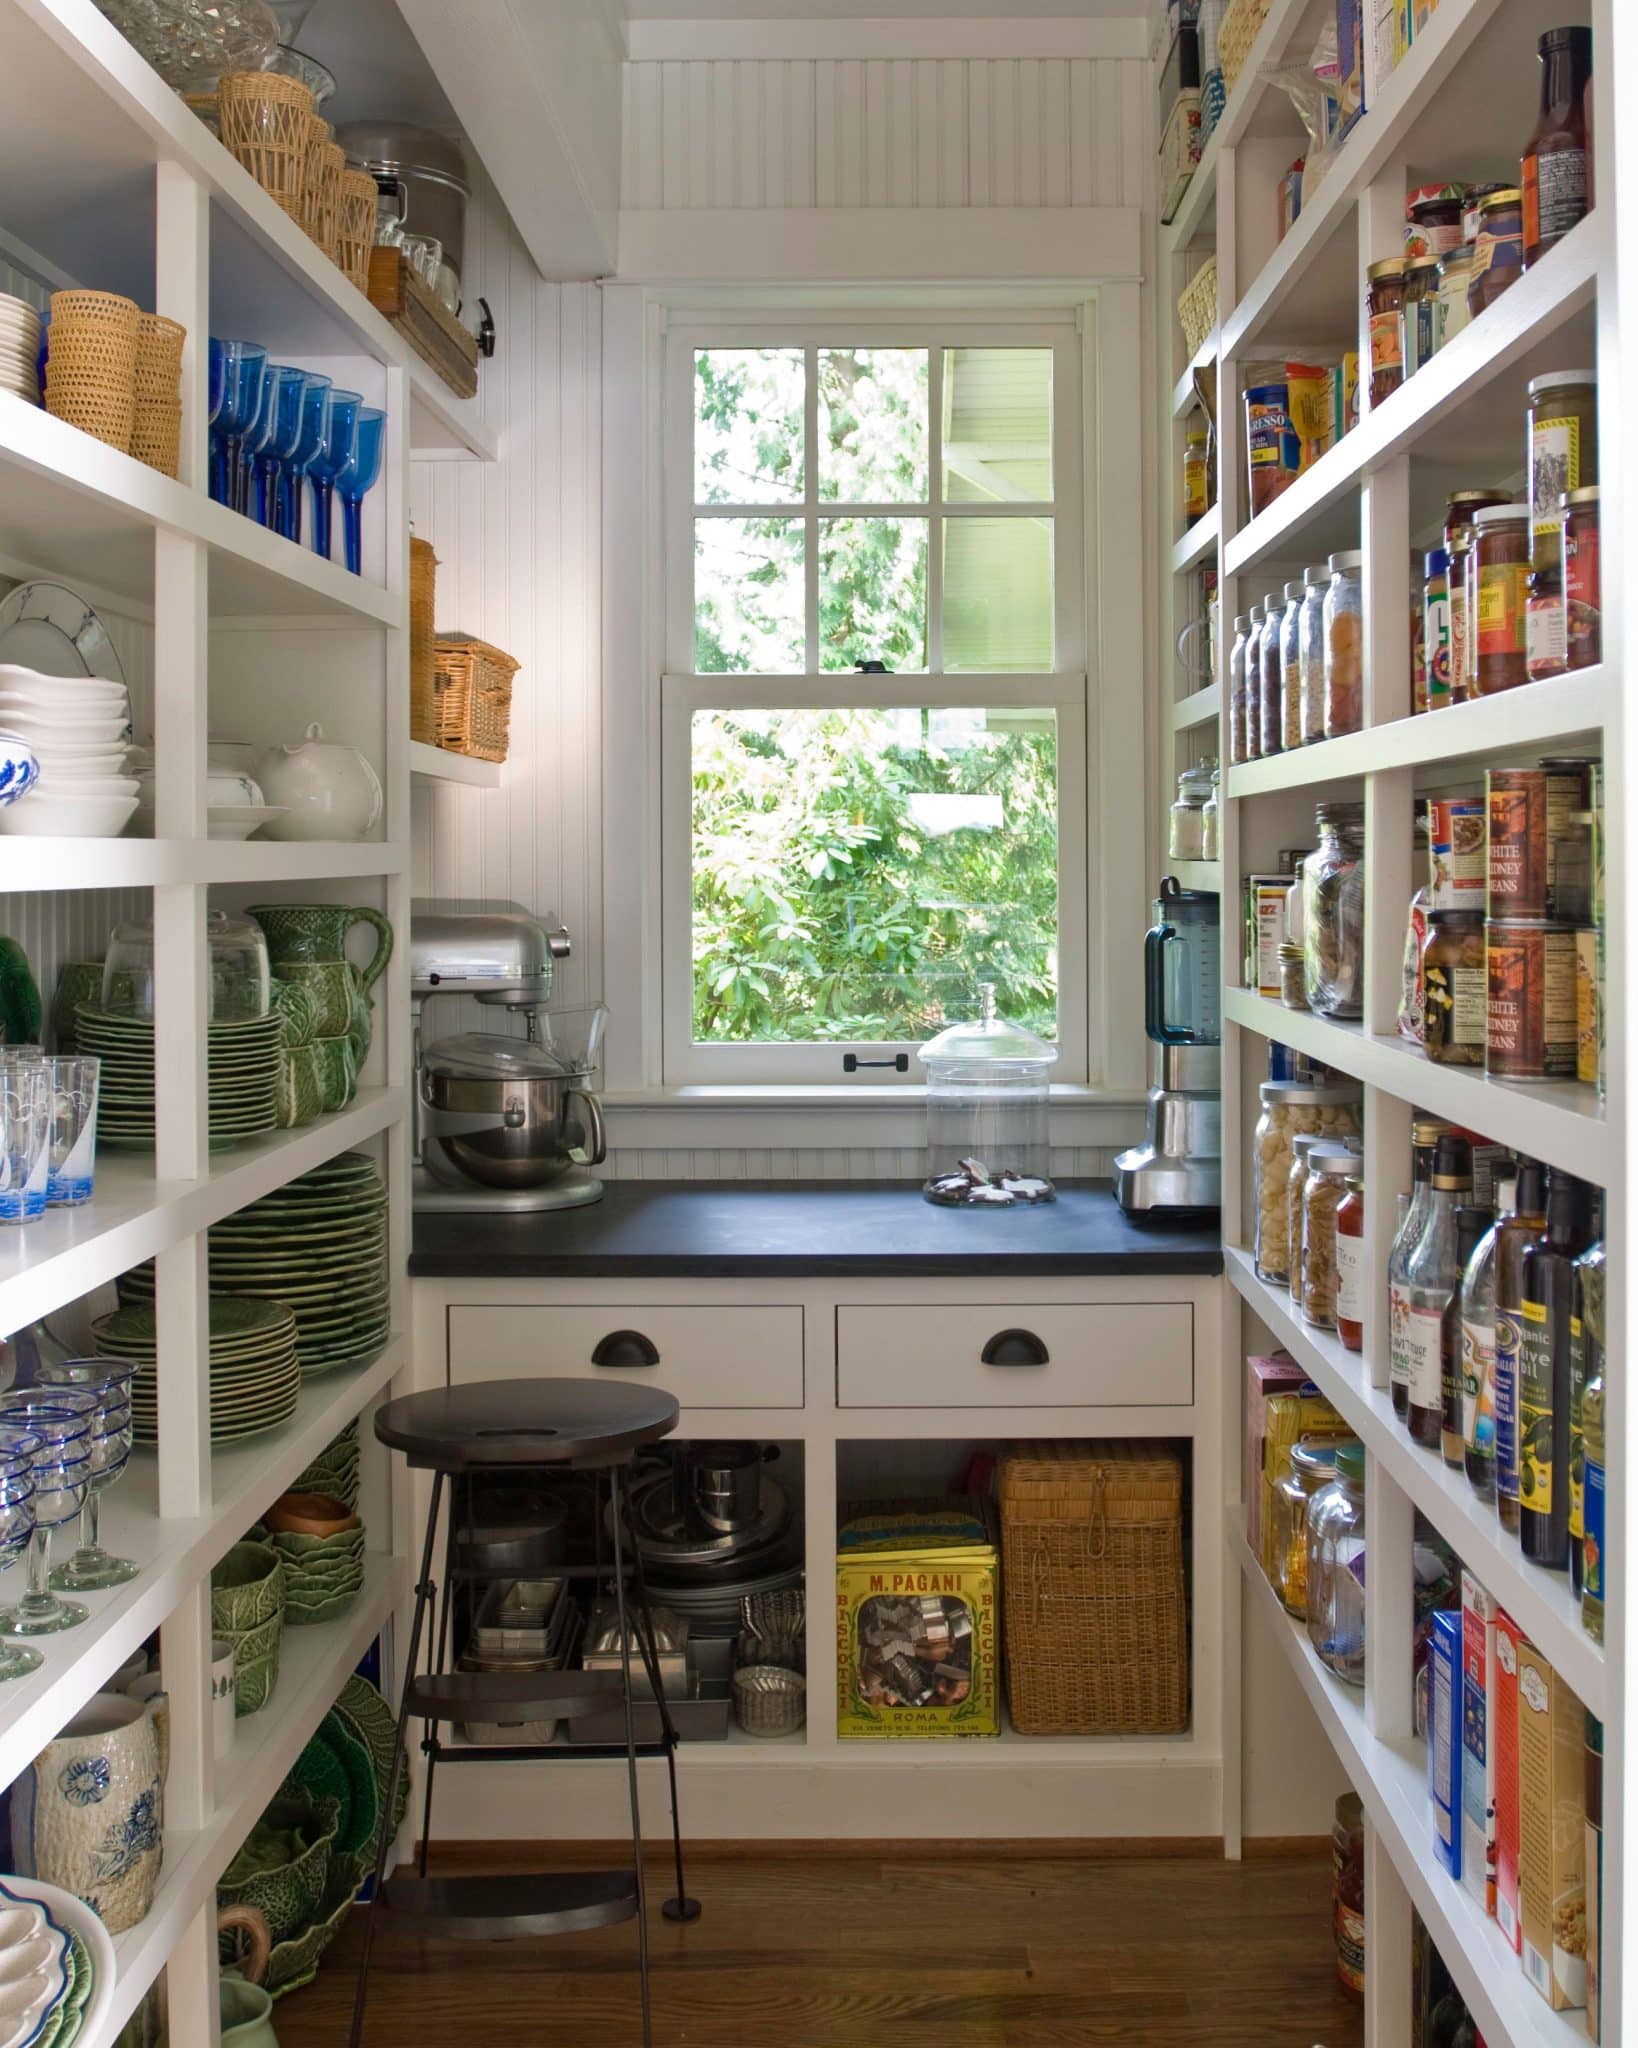 How to Maximize Storage Space in Butler’s Pantry Cabinets